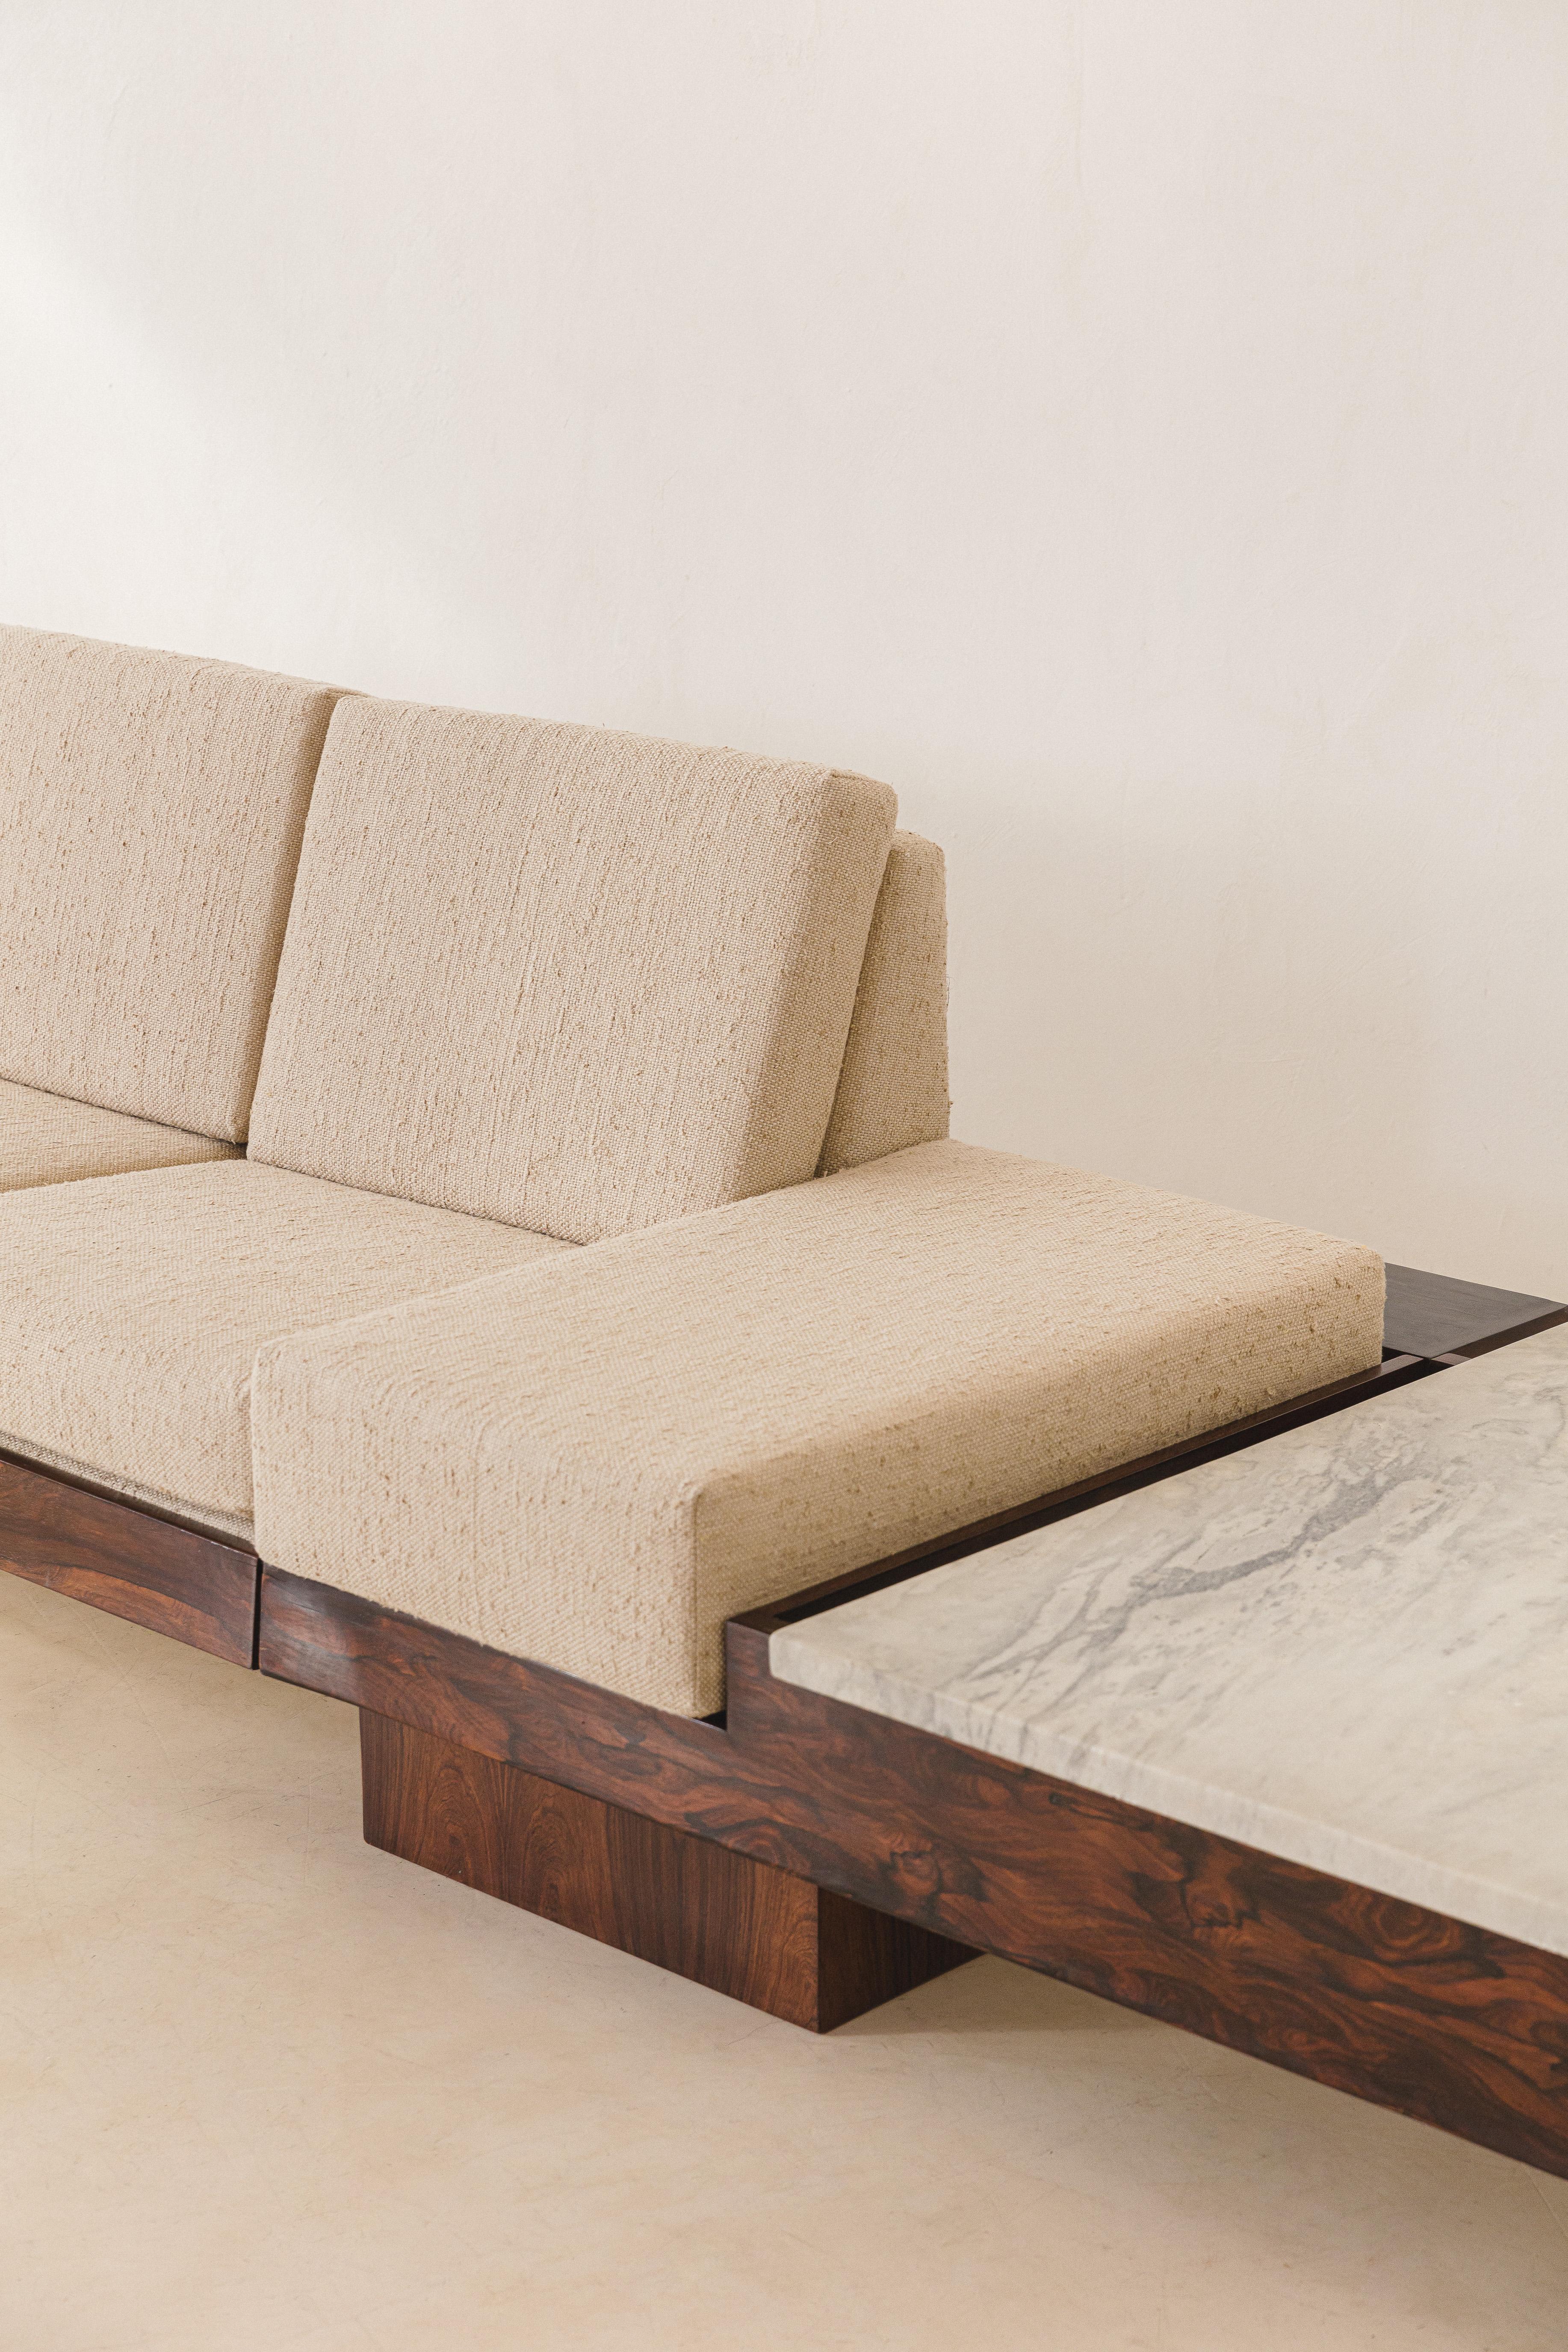 Midcentury Brazilian Sofa Design by Joaquim Tenreiro, Rosewood and Marble, 1960s For Sale 2